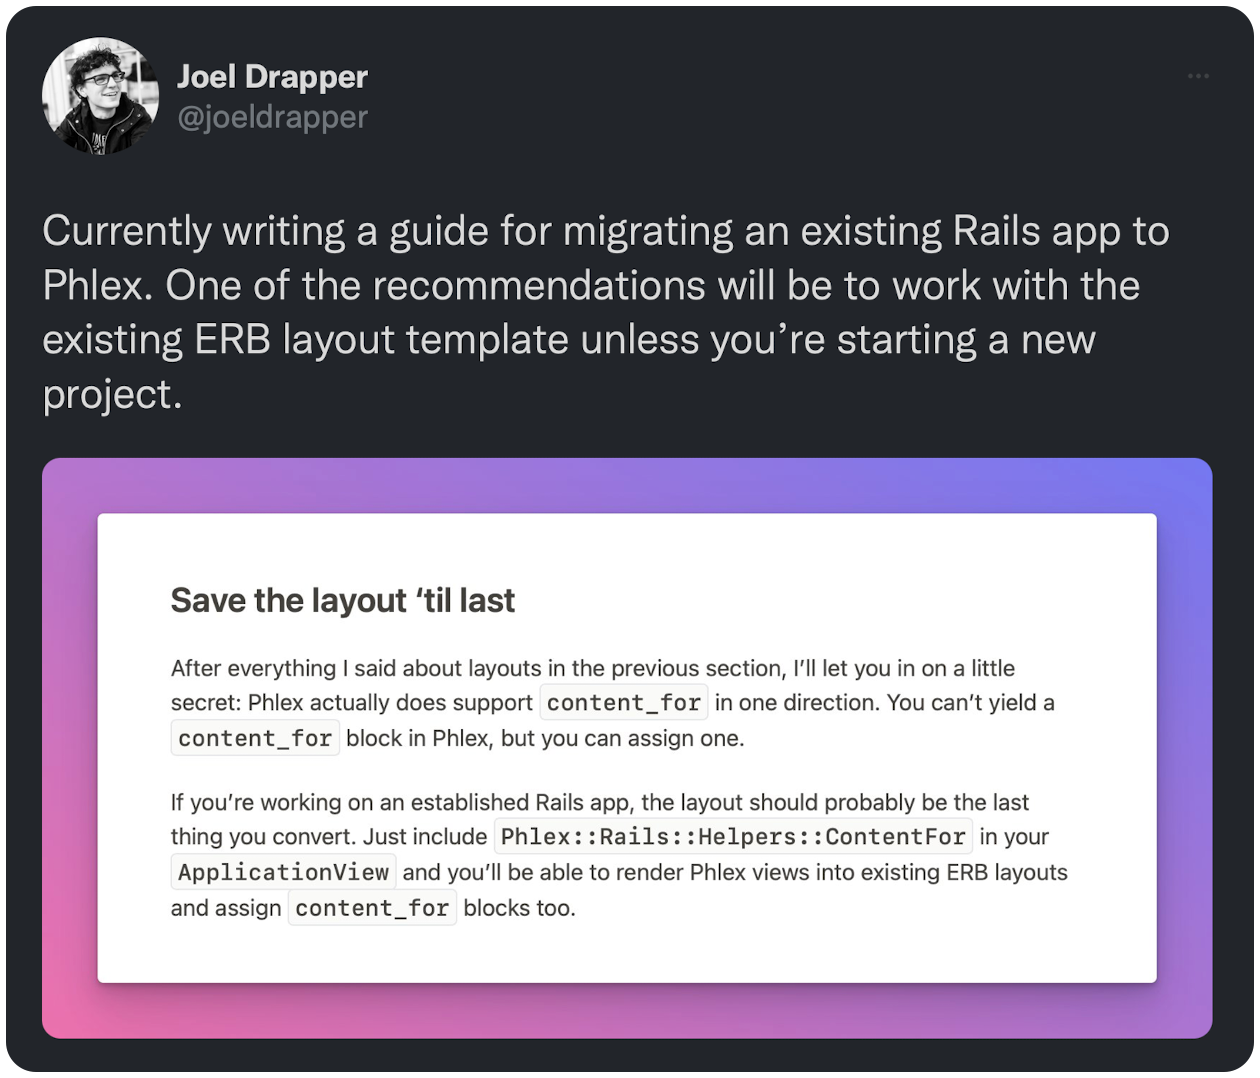 Currently writing a guide for migrating an existing Rails app to Phlex. One of the recommendations will be to work with the existing ERB layout template unless you’re starting a new project.